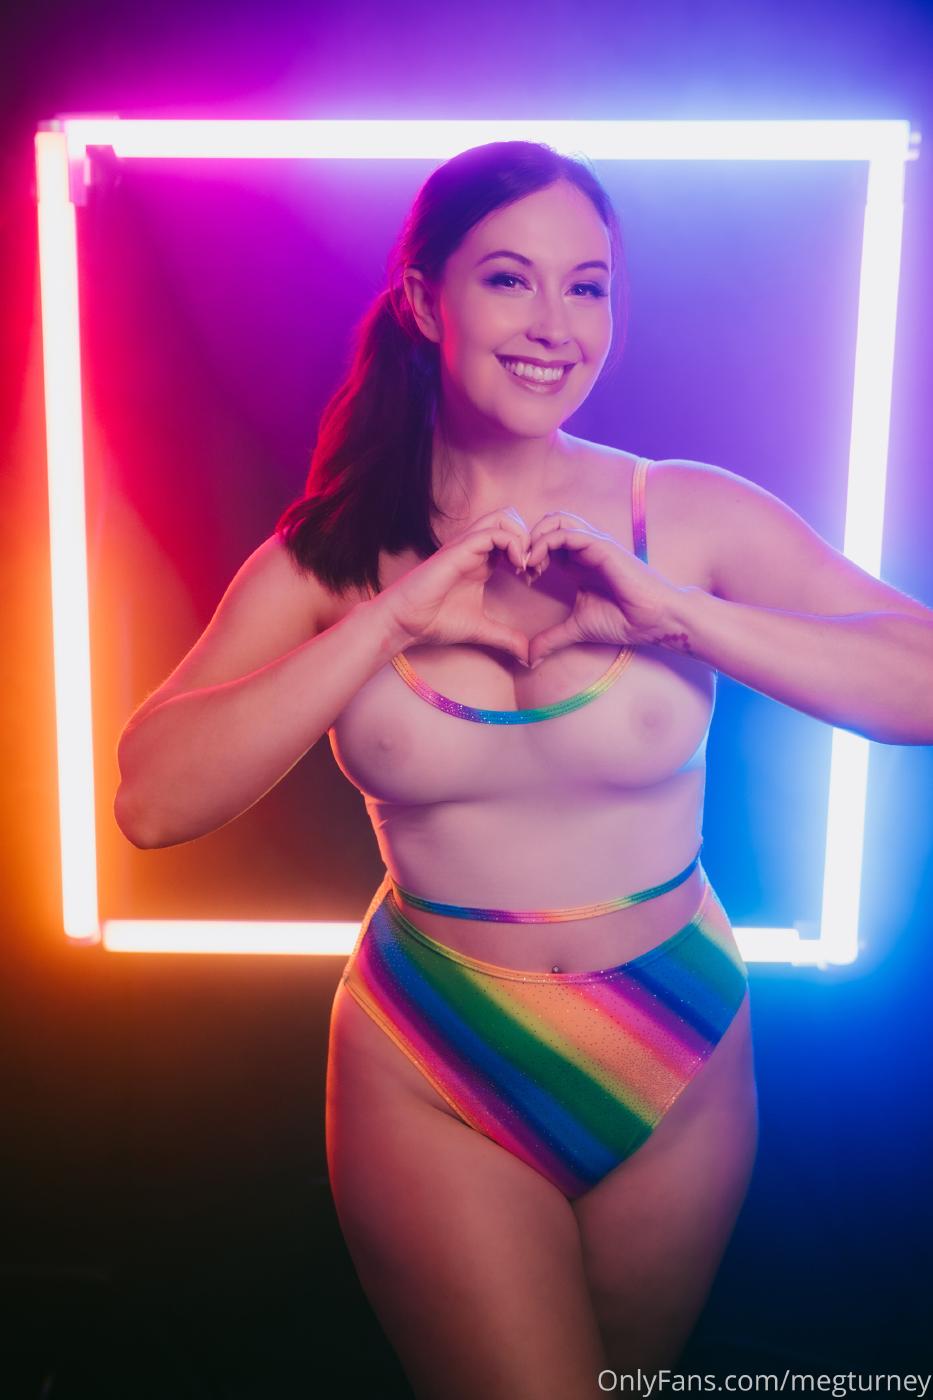 Meg Turney is an Influencer and Onlyfans creator who creates cosplay, sexy ...